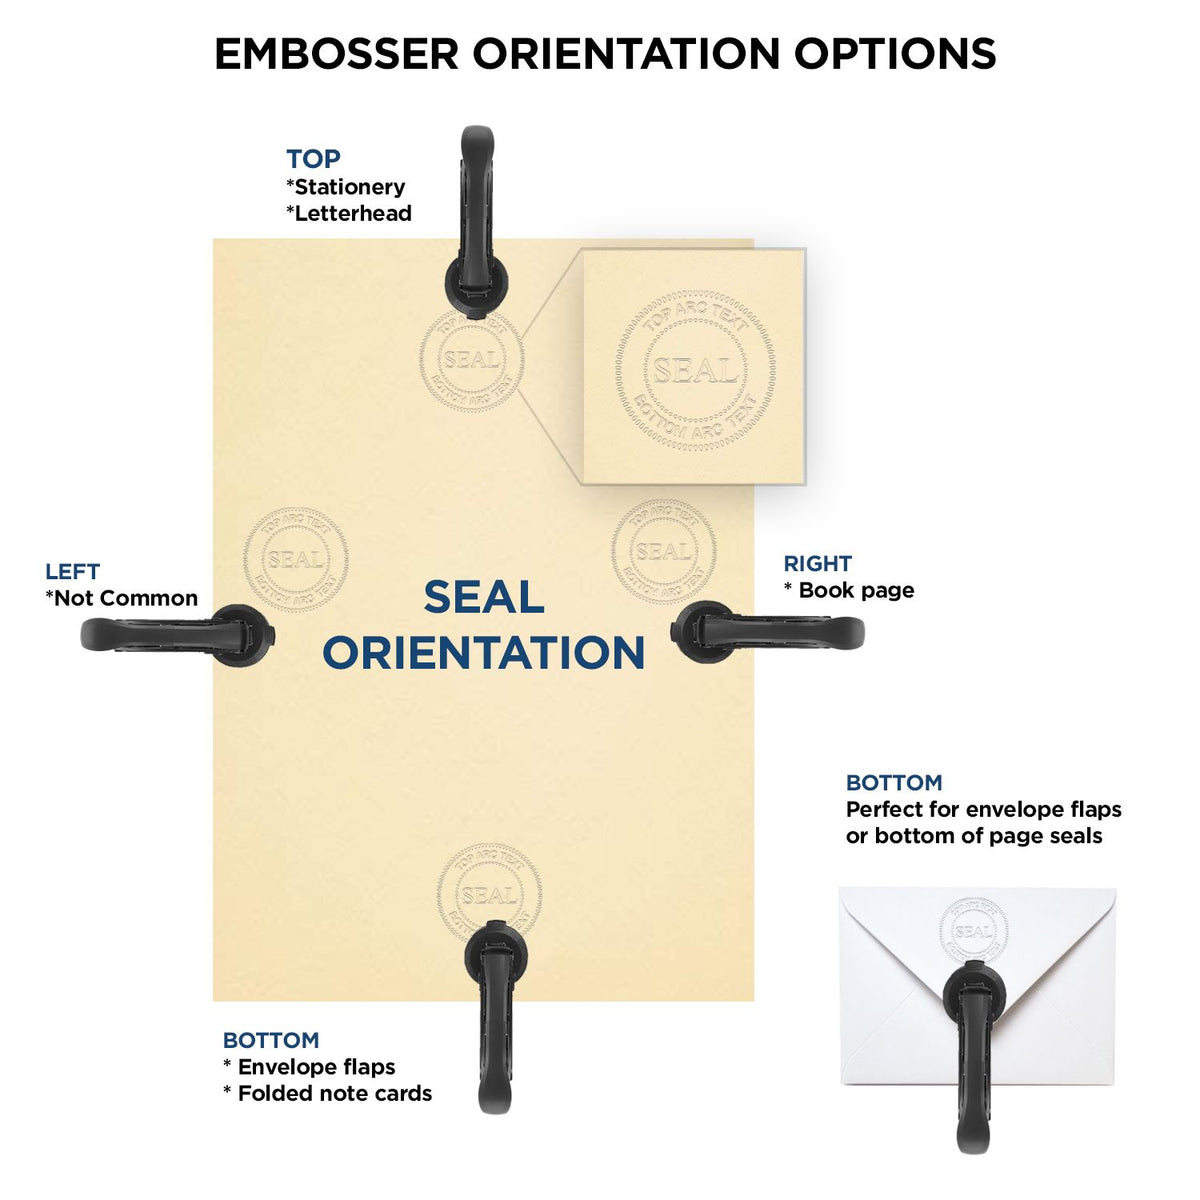 An infographic for the Soft Illinois Professional Engineer Seal showing embosser orientation, this is showing examples of a top, bottom, right and left insert.